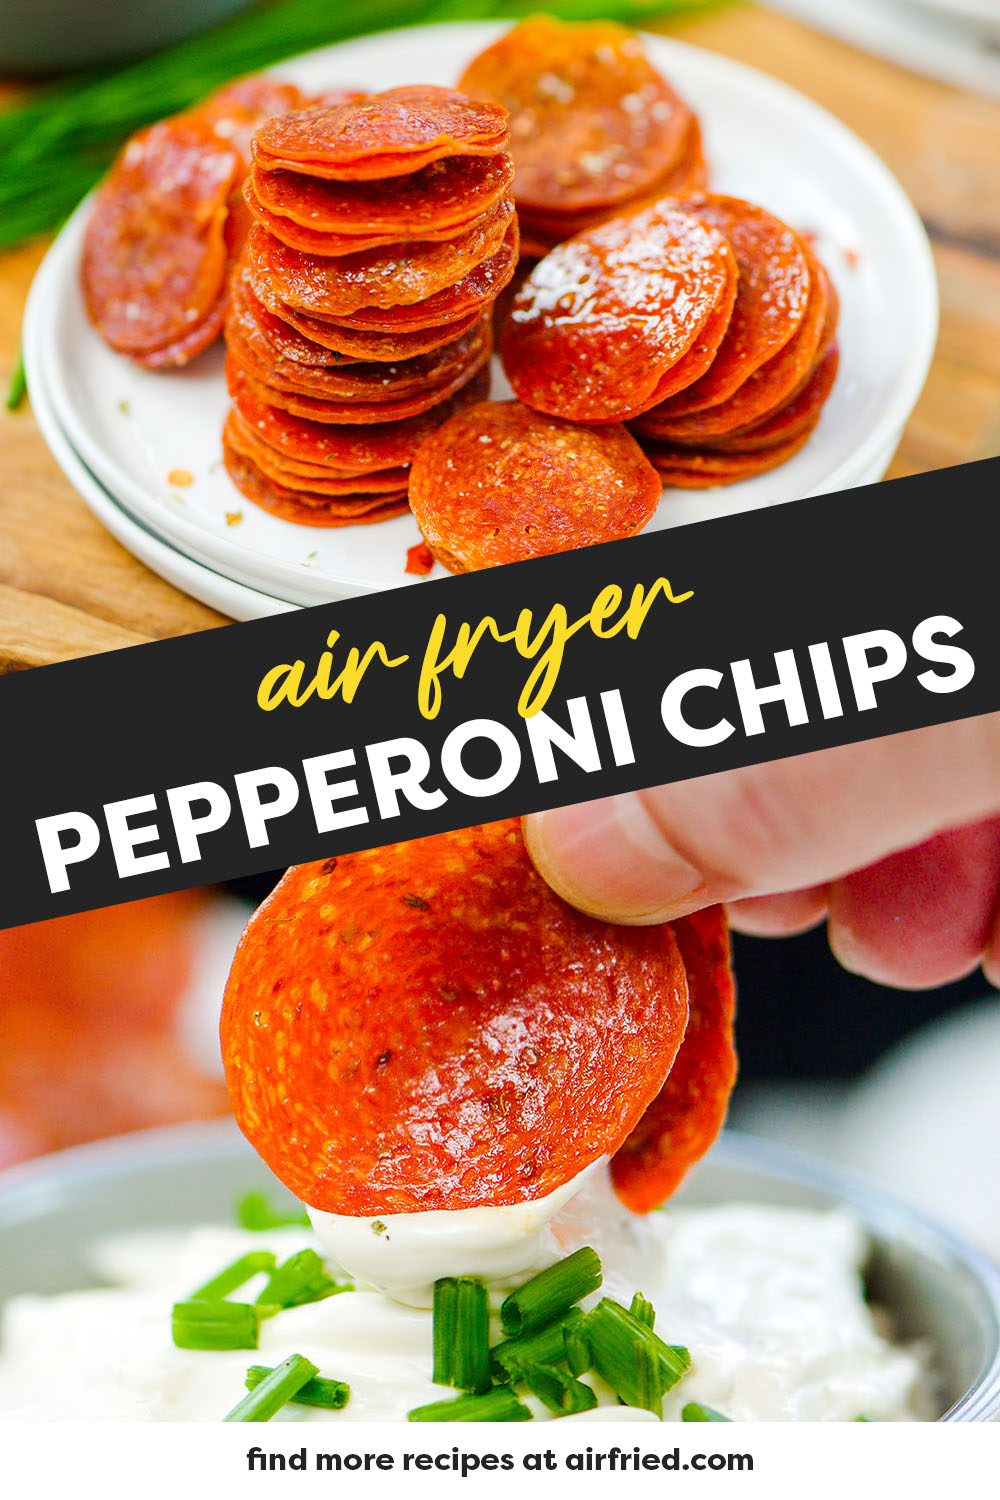 Crisp pepperoni chips are full of flavor!  And making air fryer pepperoni chips hangs onto all the flavor with ease!